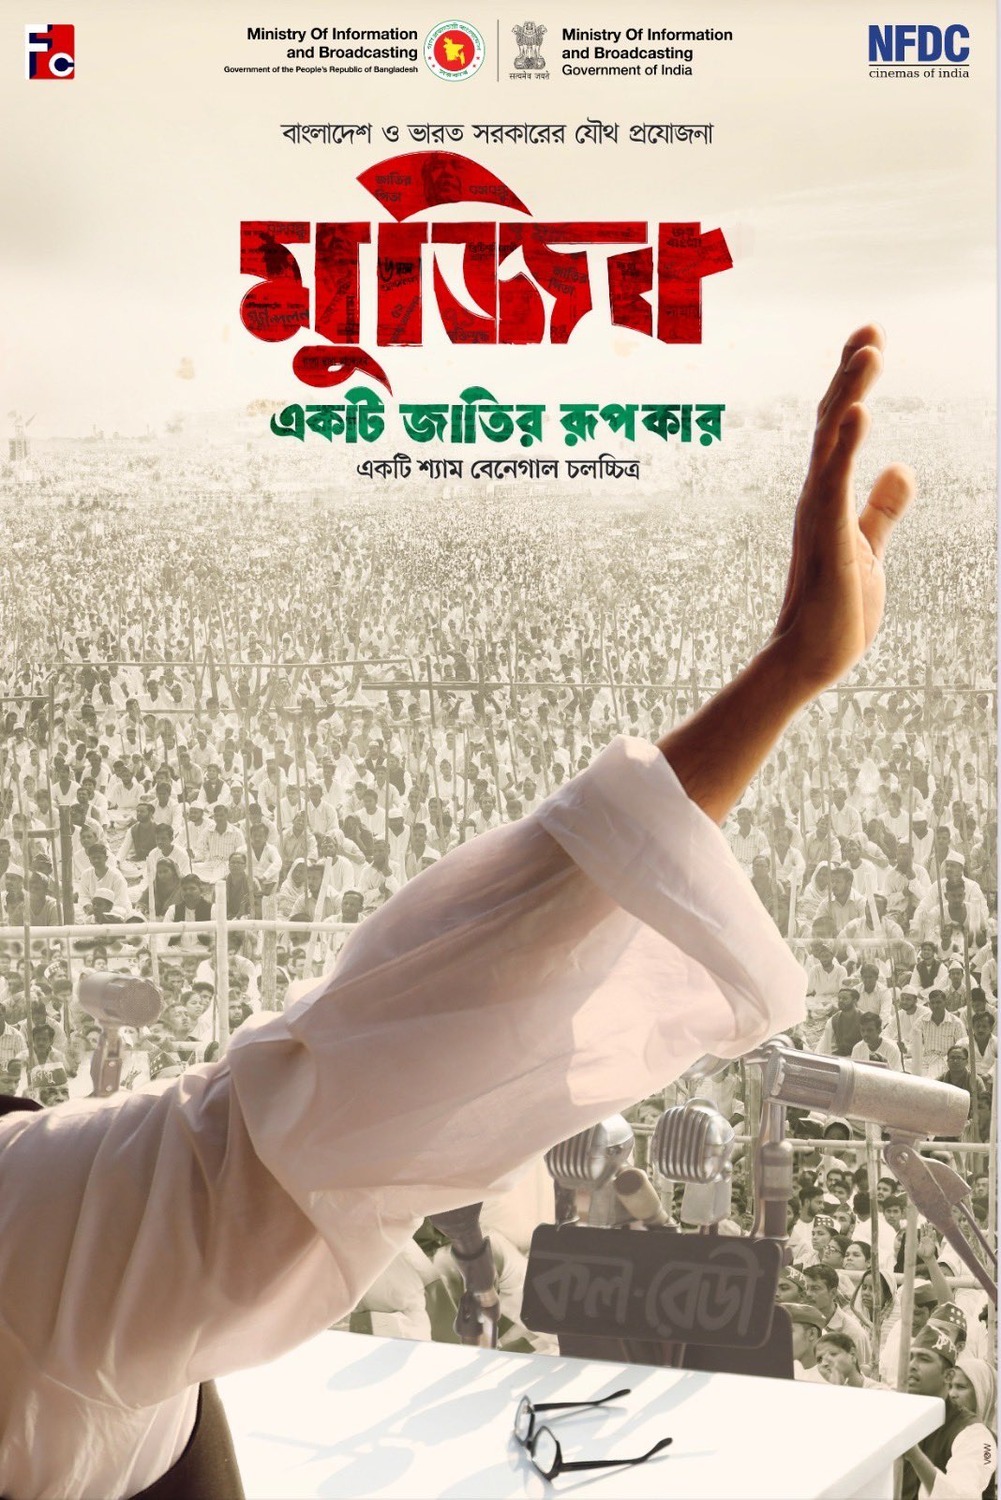 Extra Large Movie Poster Image for Mujib - The Making of a Nation (#1 of 2)